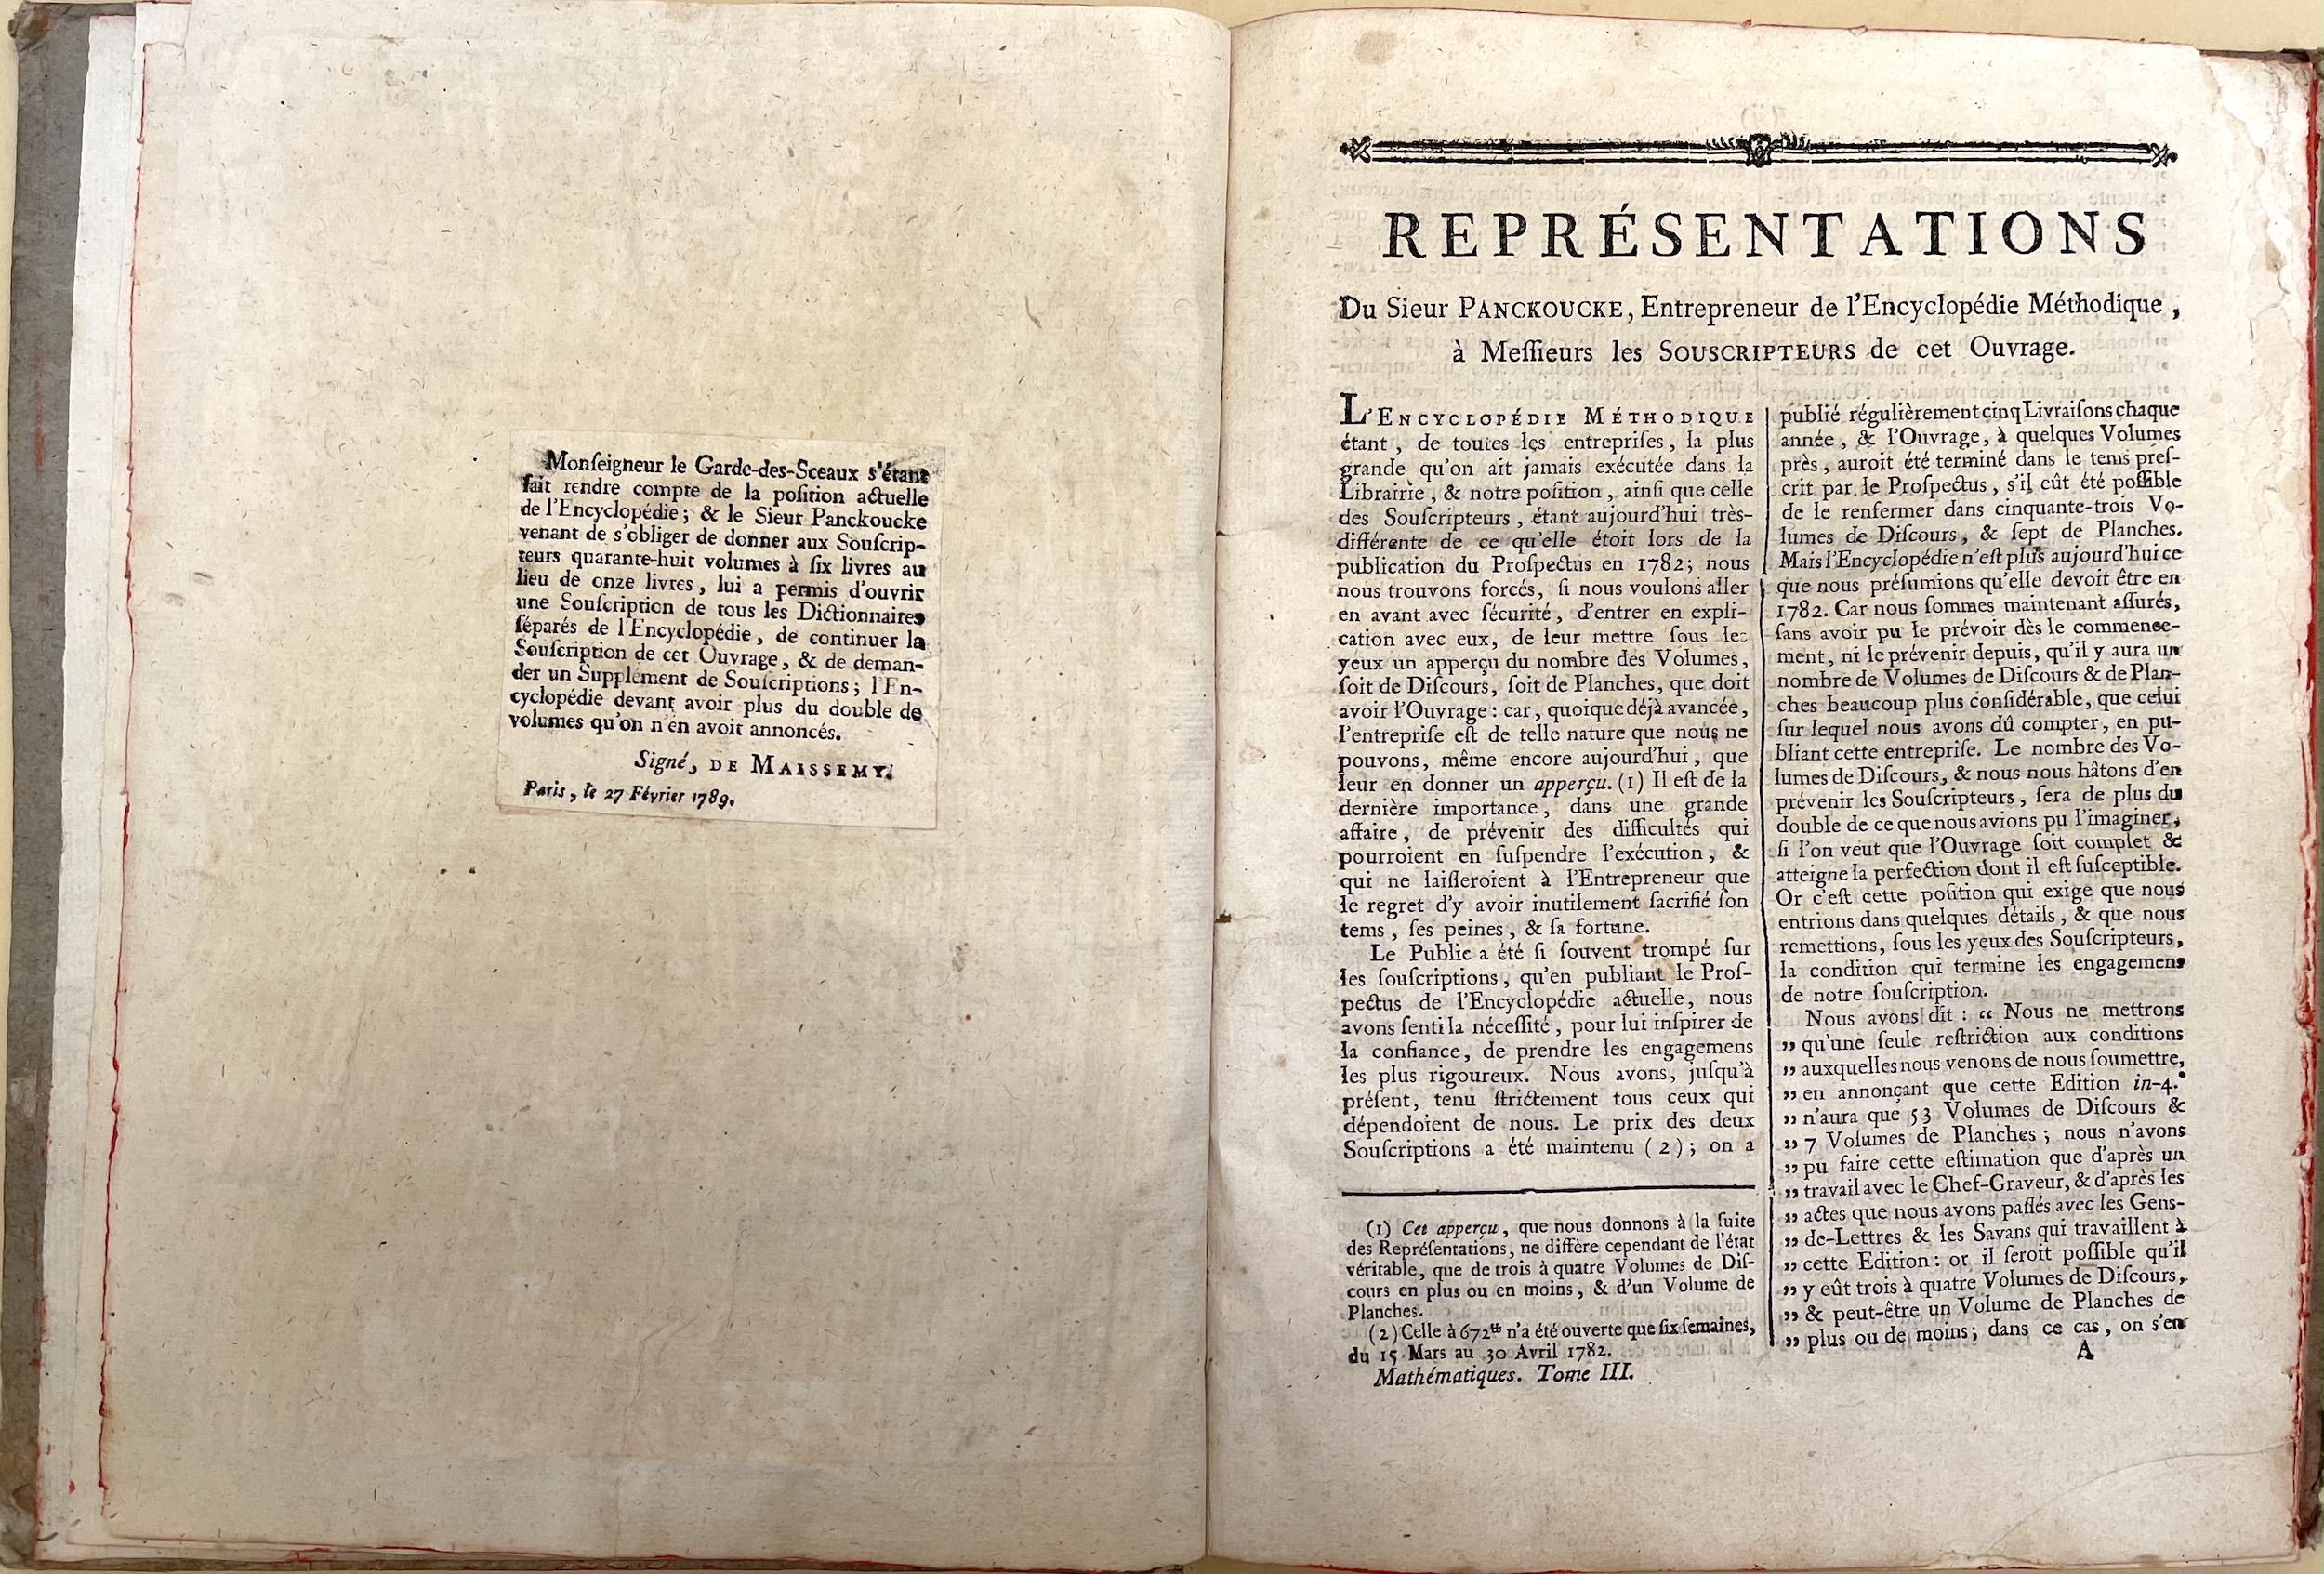 On the left side of the image (the verso of the first leaf of the prospectus) we see a pasted on slip indicating that since far more volumes have been published than were announced in the ori